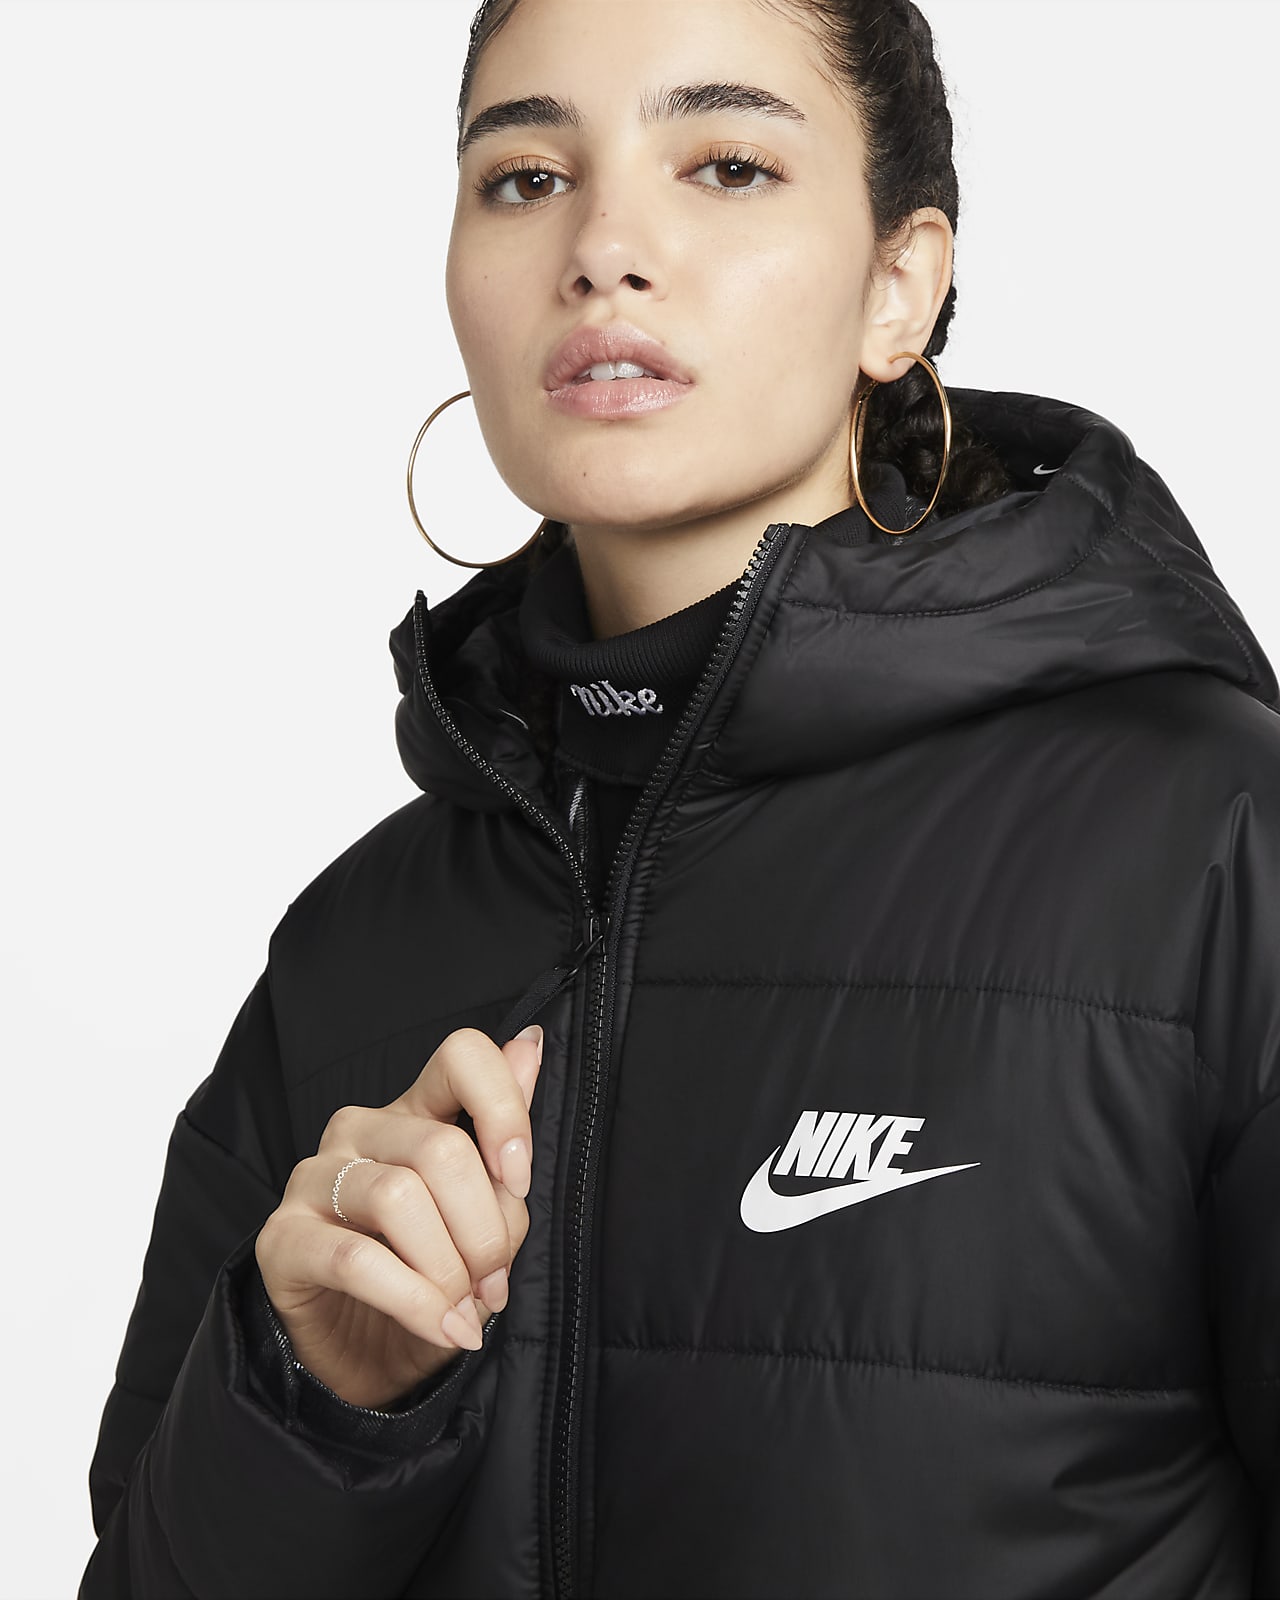 Nike Sportswear Therma-FIT Repel Women's Synthetic-Fill Hooded Parka